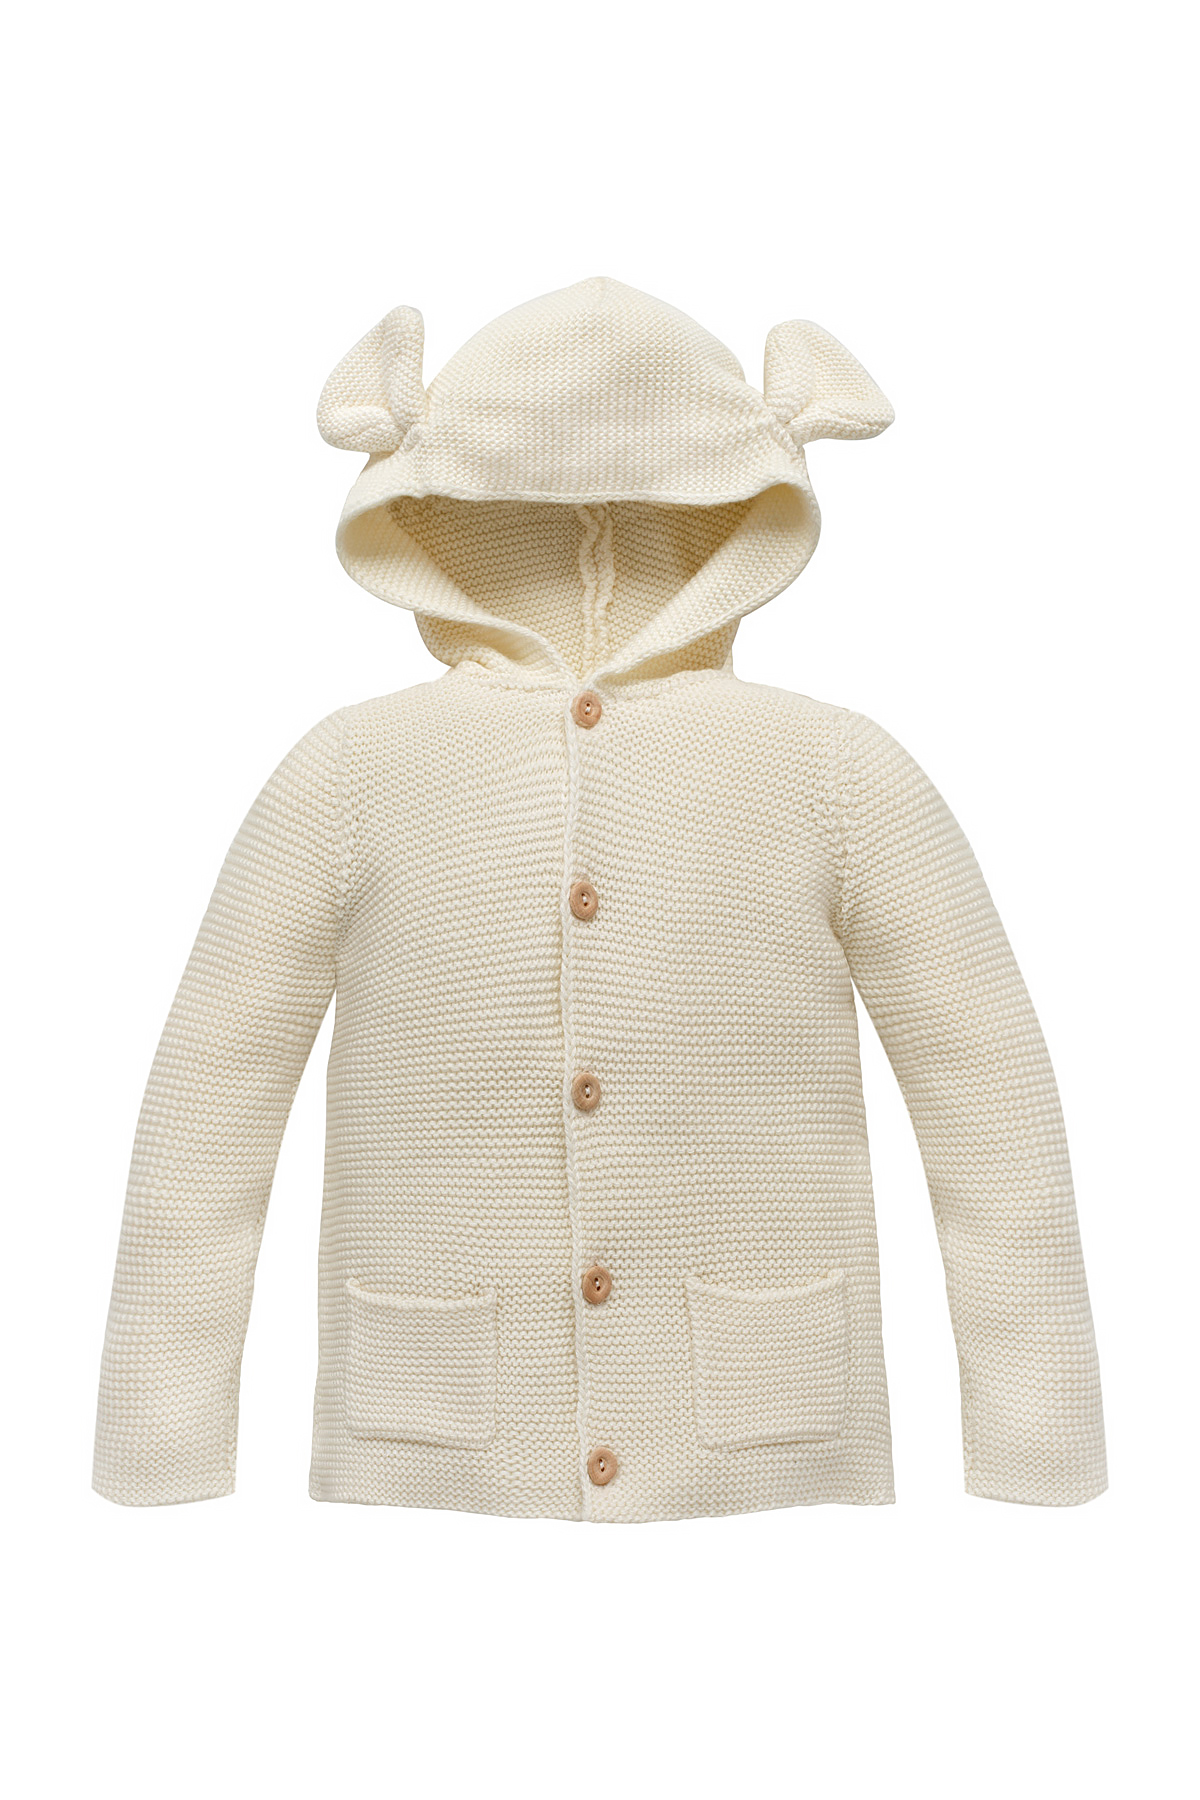 Image of baby sweater hood in beige colour